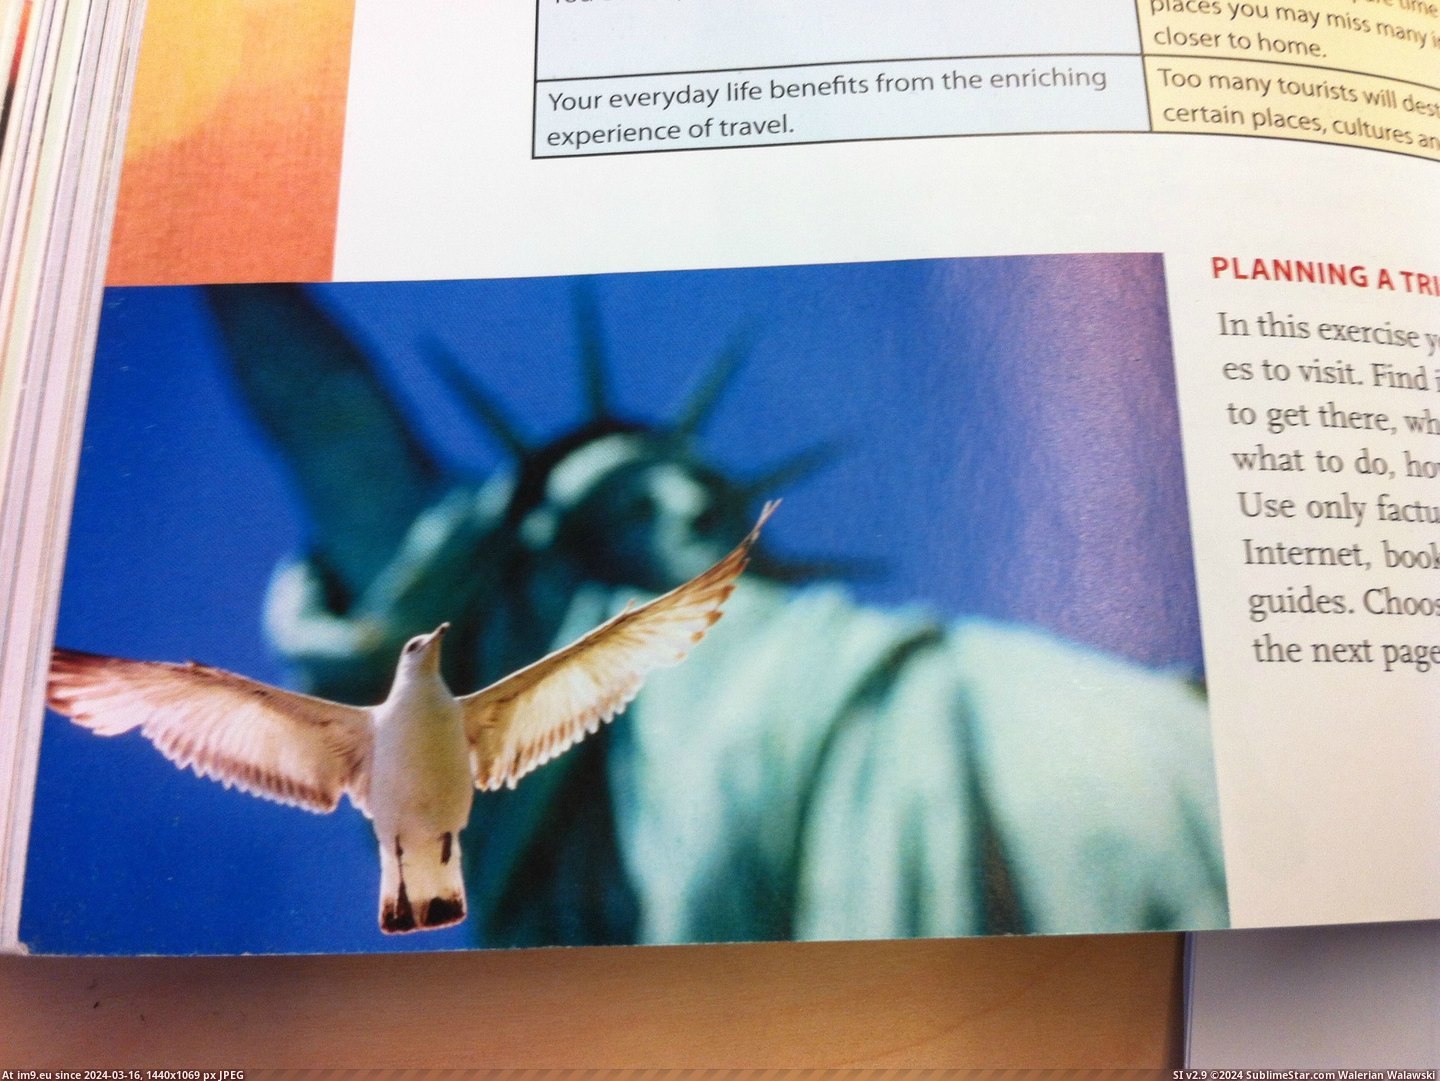 #Day #Dad #Happened #Textbook #Copyrighted #English #Photograph #Pissed [Pics] So I happened to come across my dad's copyrighted photograph in my English textbook the other day. He's pissed for sure.  Pic. (Изображение из альбом My r/PICS favs))